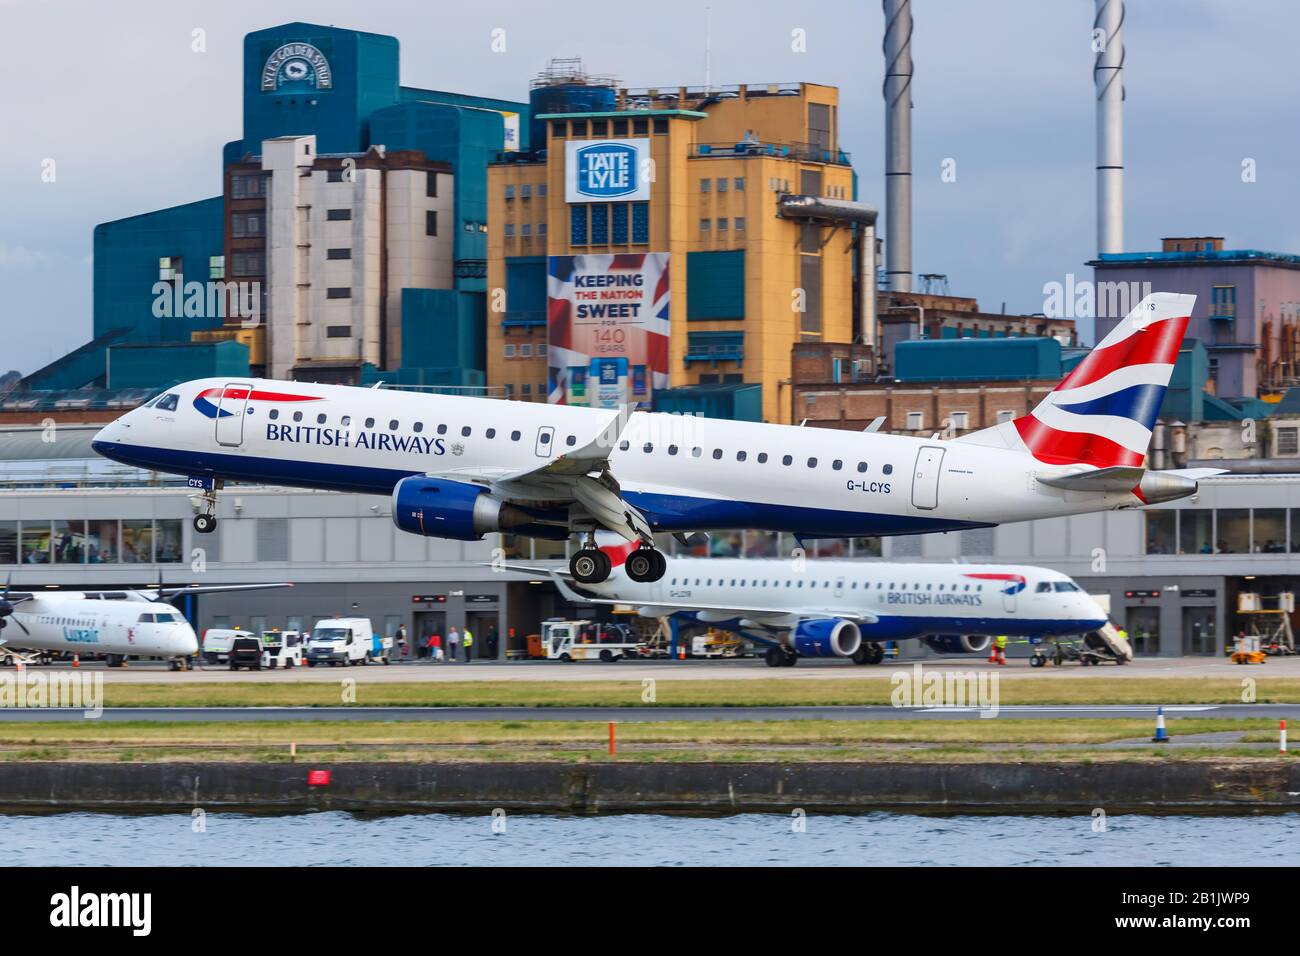 London, United Kingdom – July 7, 2019: British Airways BA CityFlyer Embraer 190 airplane at London City airport (LCY) in the United Kingdom. Stock Photo